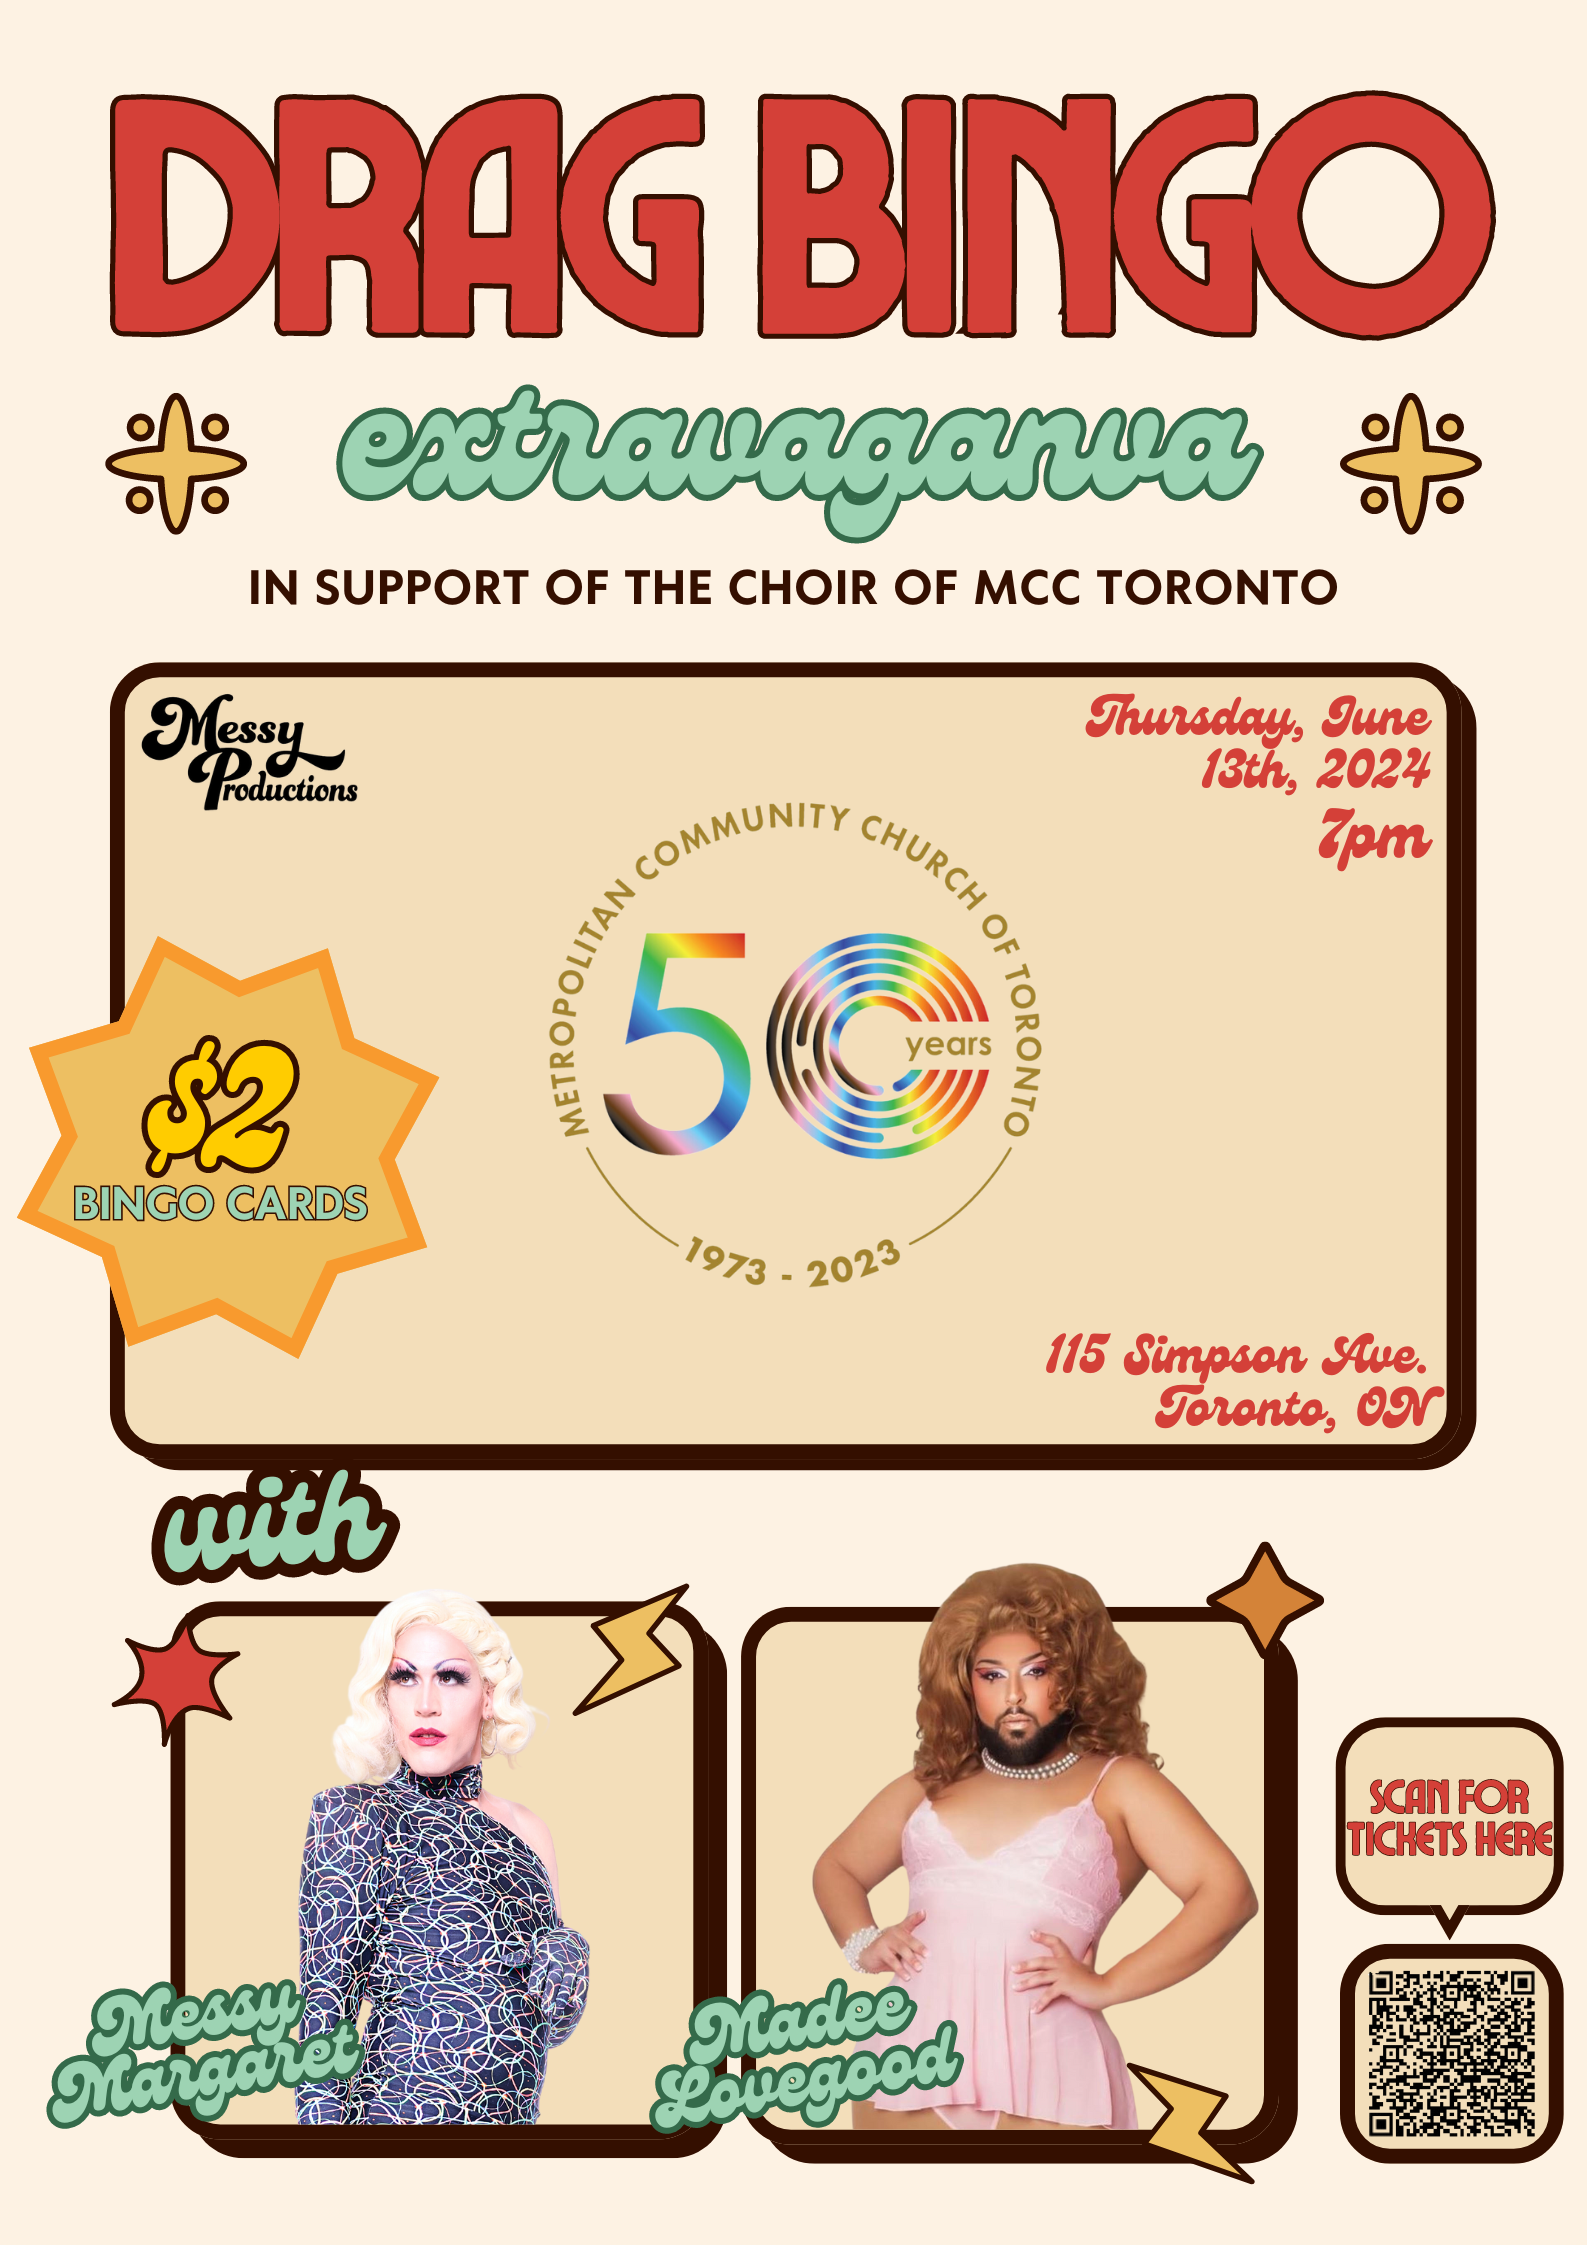 Poster for "Drag Bingo Extravaganza" in support of the Choir of MCC Toronto. The event will take place on Thursday, June 13th, 2024, at 7 PM at 115 Simpson Ave., Toronto, ON. Bingo cards cost $2 each. The poster features the Metropolitan Community Church of Toronto's 50th anniversary logo and images of drag queens Messy Margaret and Madee Lovegood. The text highlights that there will be prizes, raffles, and lots of laughs, with all proceeds going to support the choir. There is also a QR code to scan for tickets.